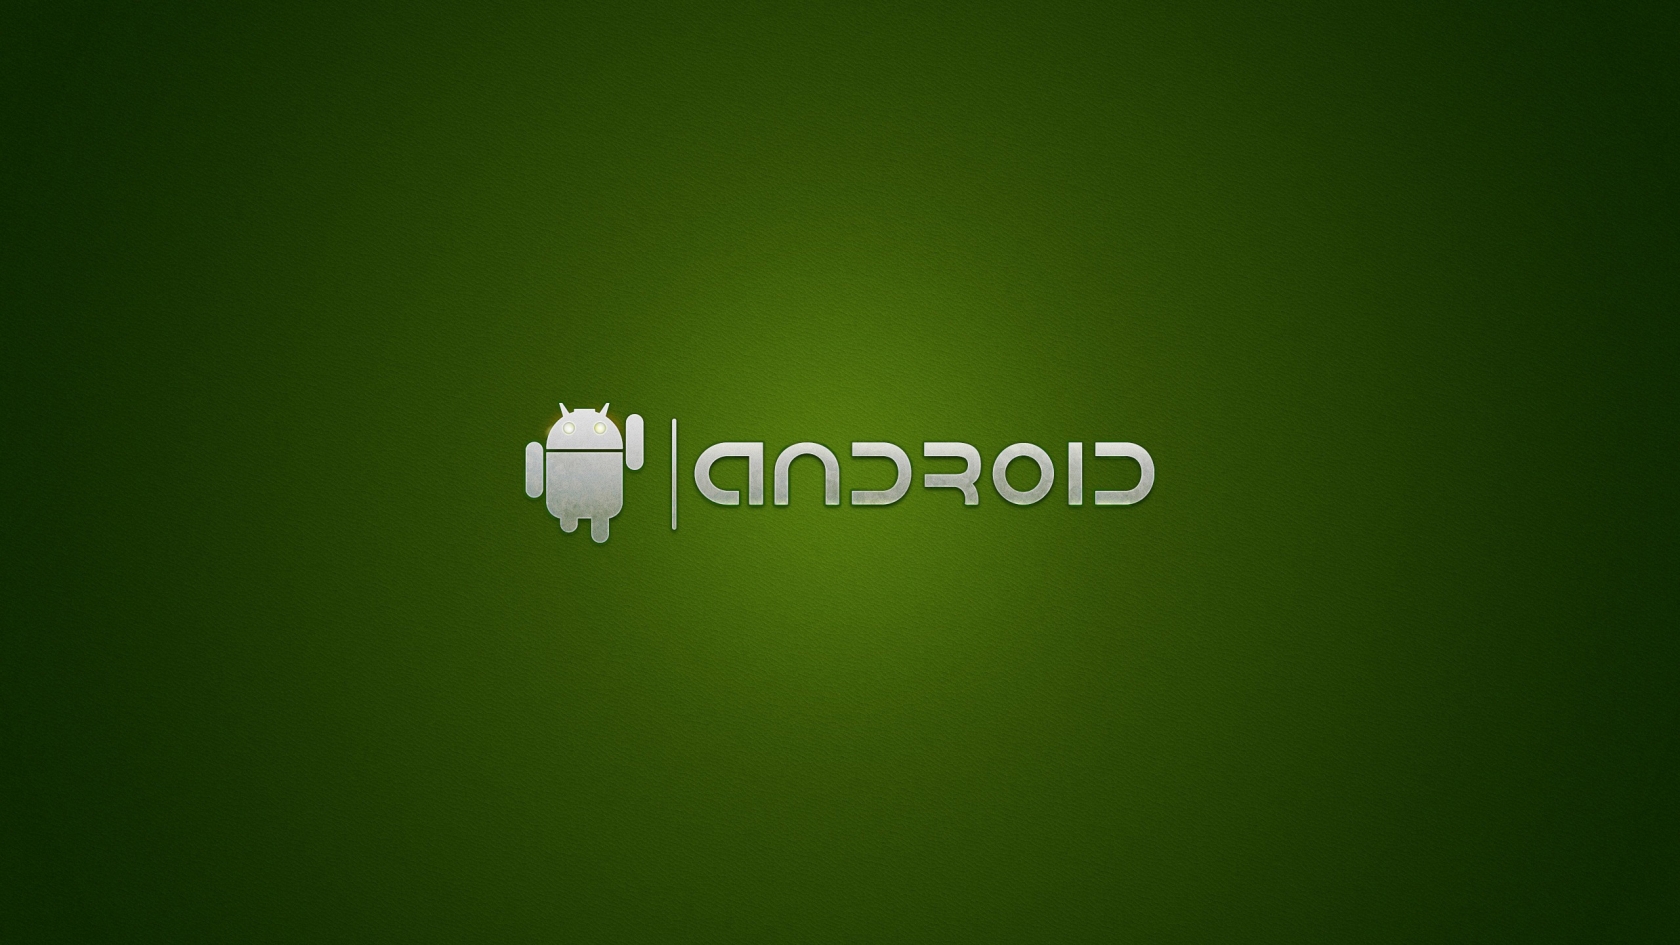 Android for 1680 x 945 HDTV resolution